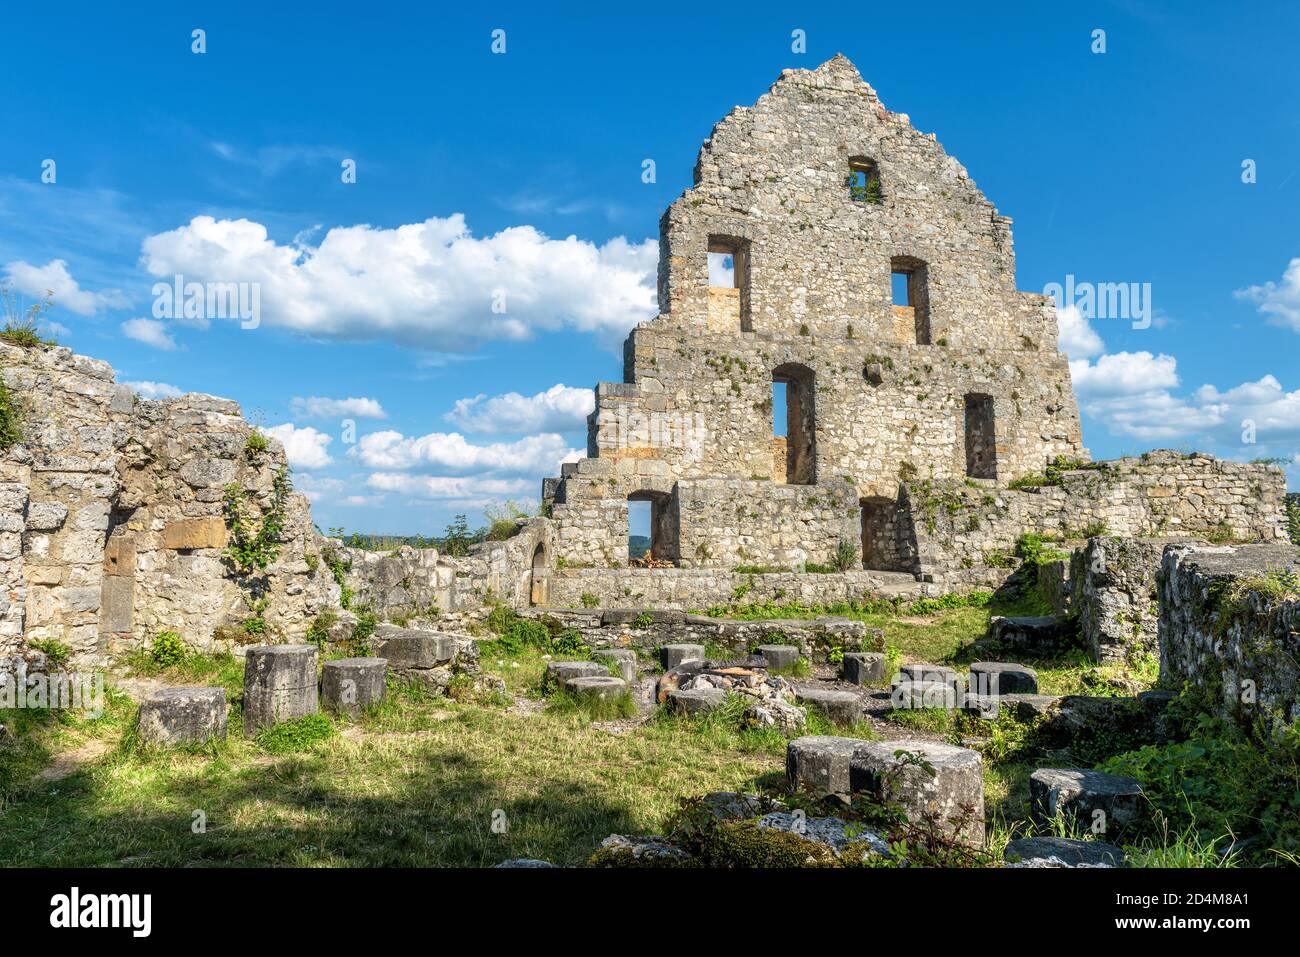 Ruins of Hohenurach Castle in countryside near old town of Bad Urach, Germany. Landscape with abandoned German castle in Swabian Alps in summer. This Stock Photo